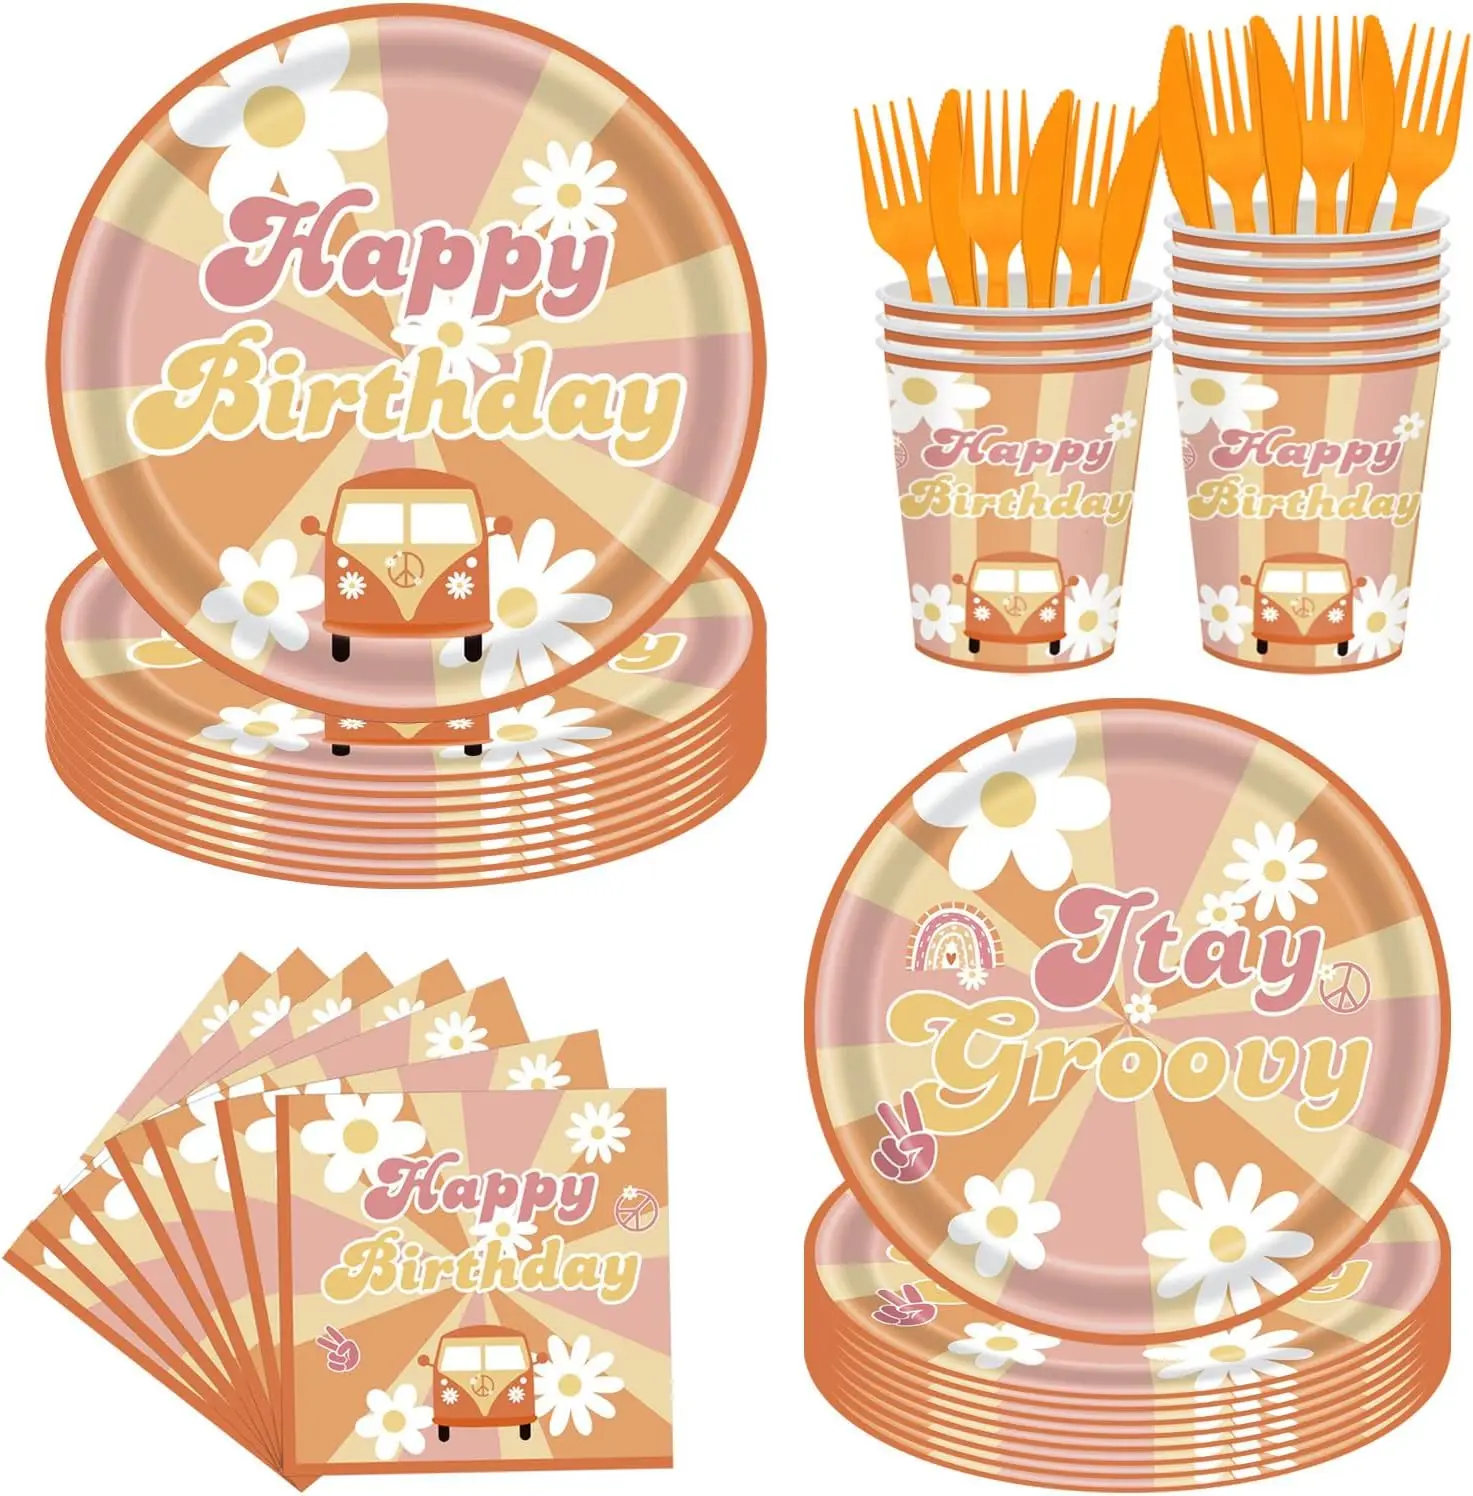 

144Pcs Retro Boho Hippie Birthday Decorations Groovy Party Supplies Tableware Set For Serves 24 Daisy Flower Plates Baby Shower